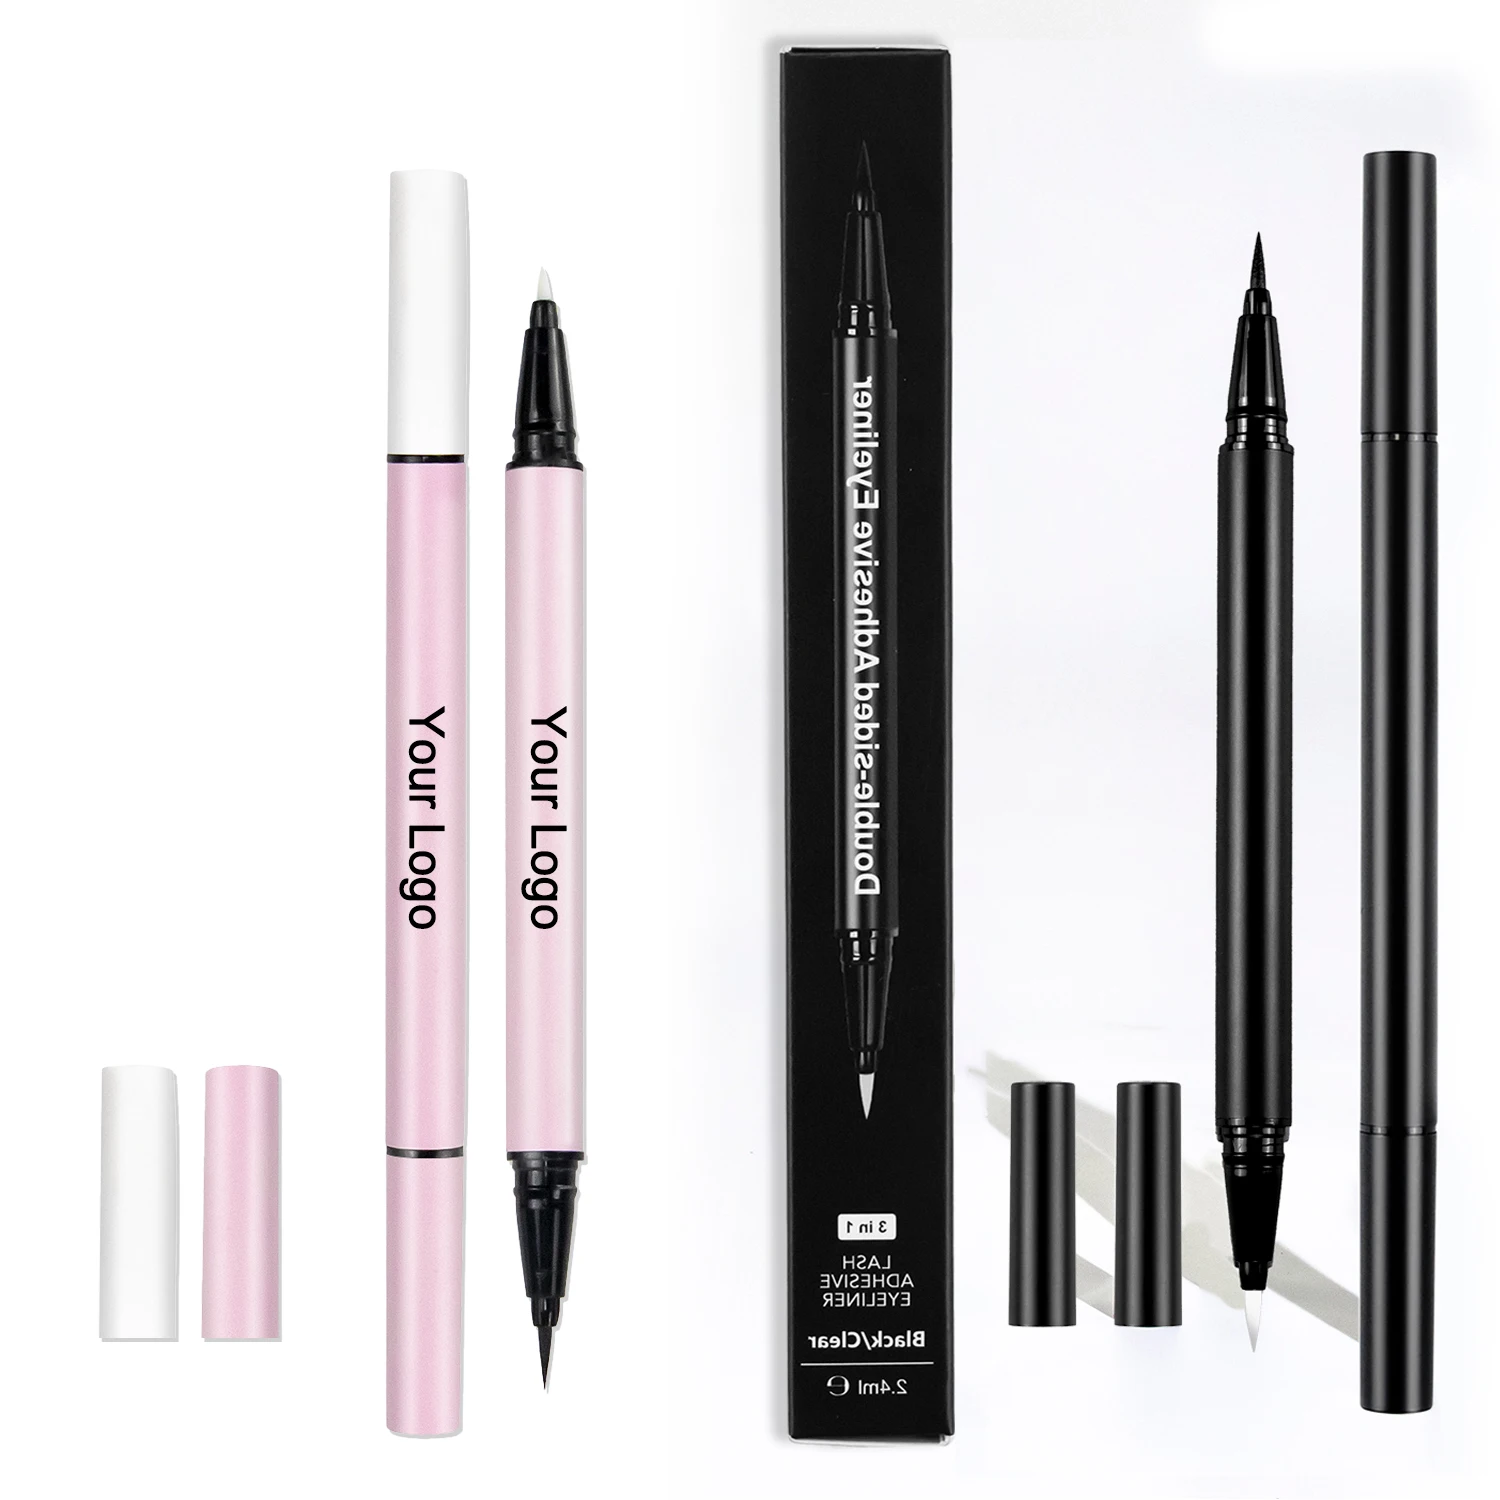 

2021 Wholesale eye beauty waterproof 2in1 double ended eyeliner self double sided adhesive eyeliner private label, Black/clear